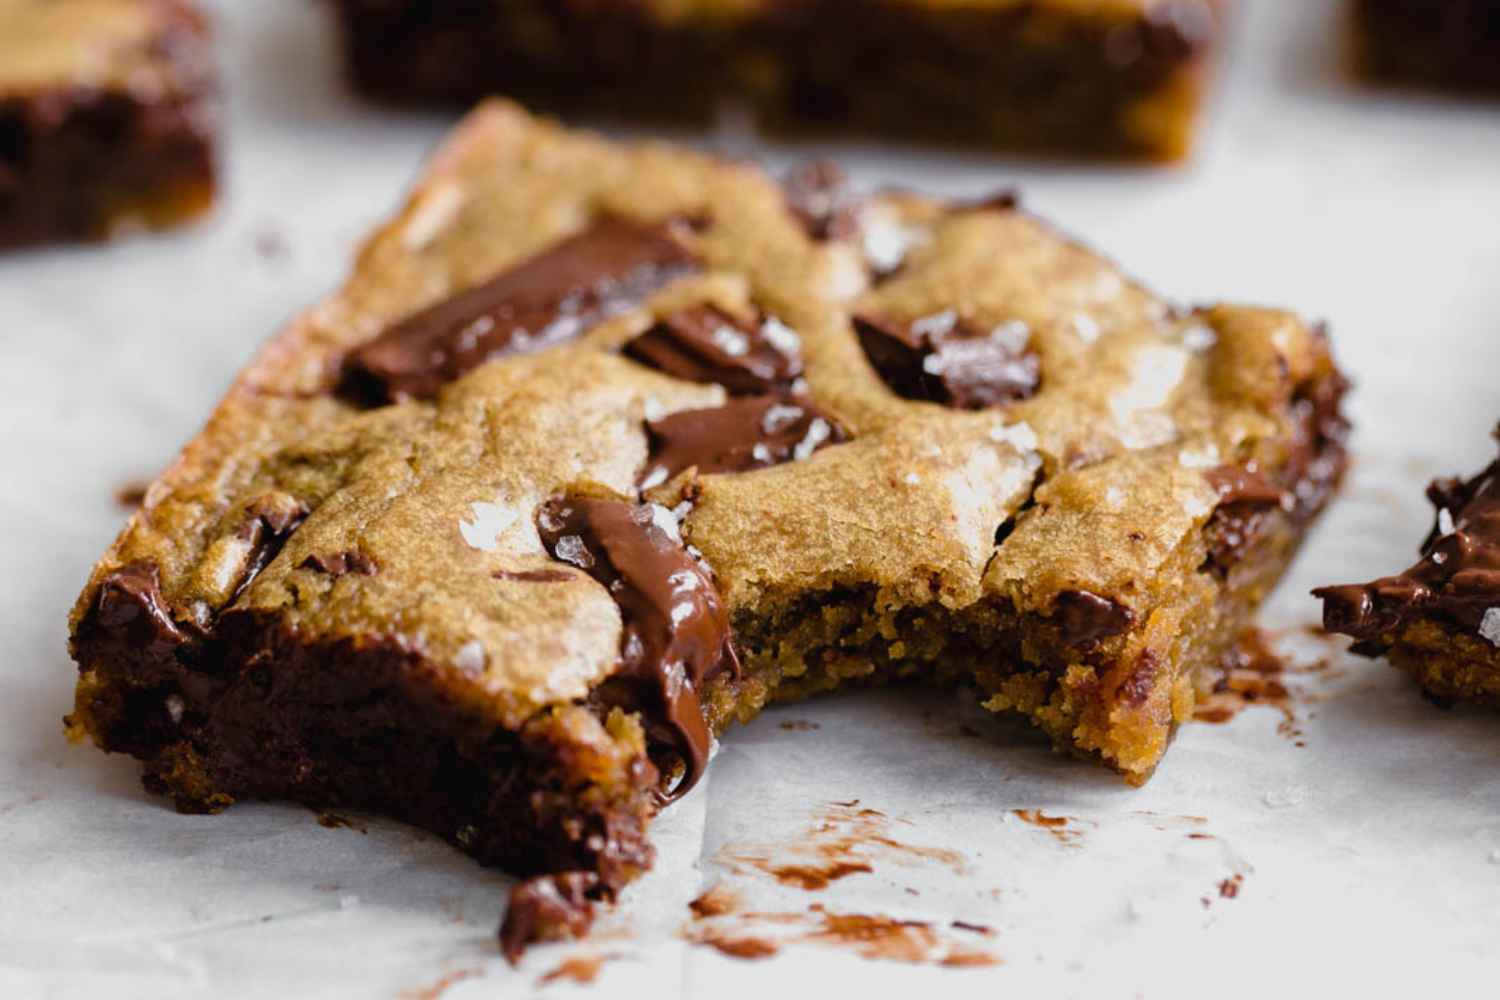 a slice of gooey chocolate chunk blondie with a bite taken out.